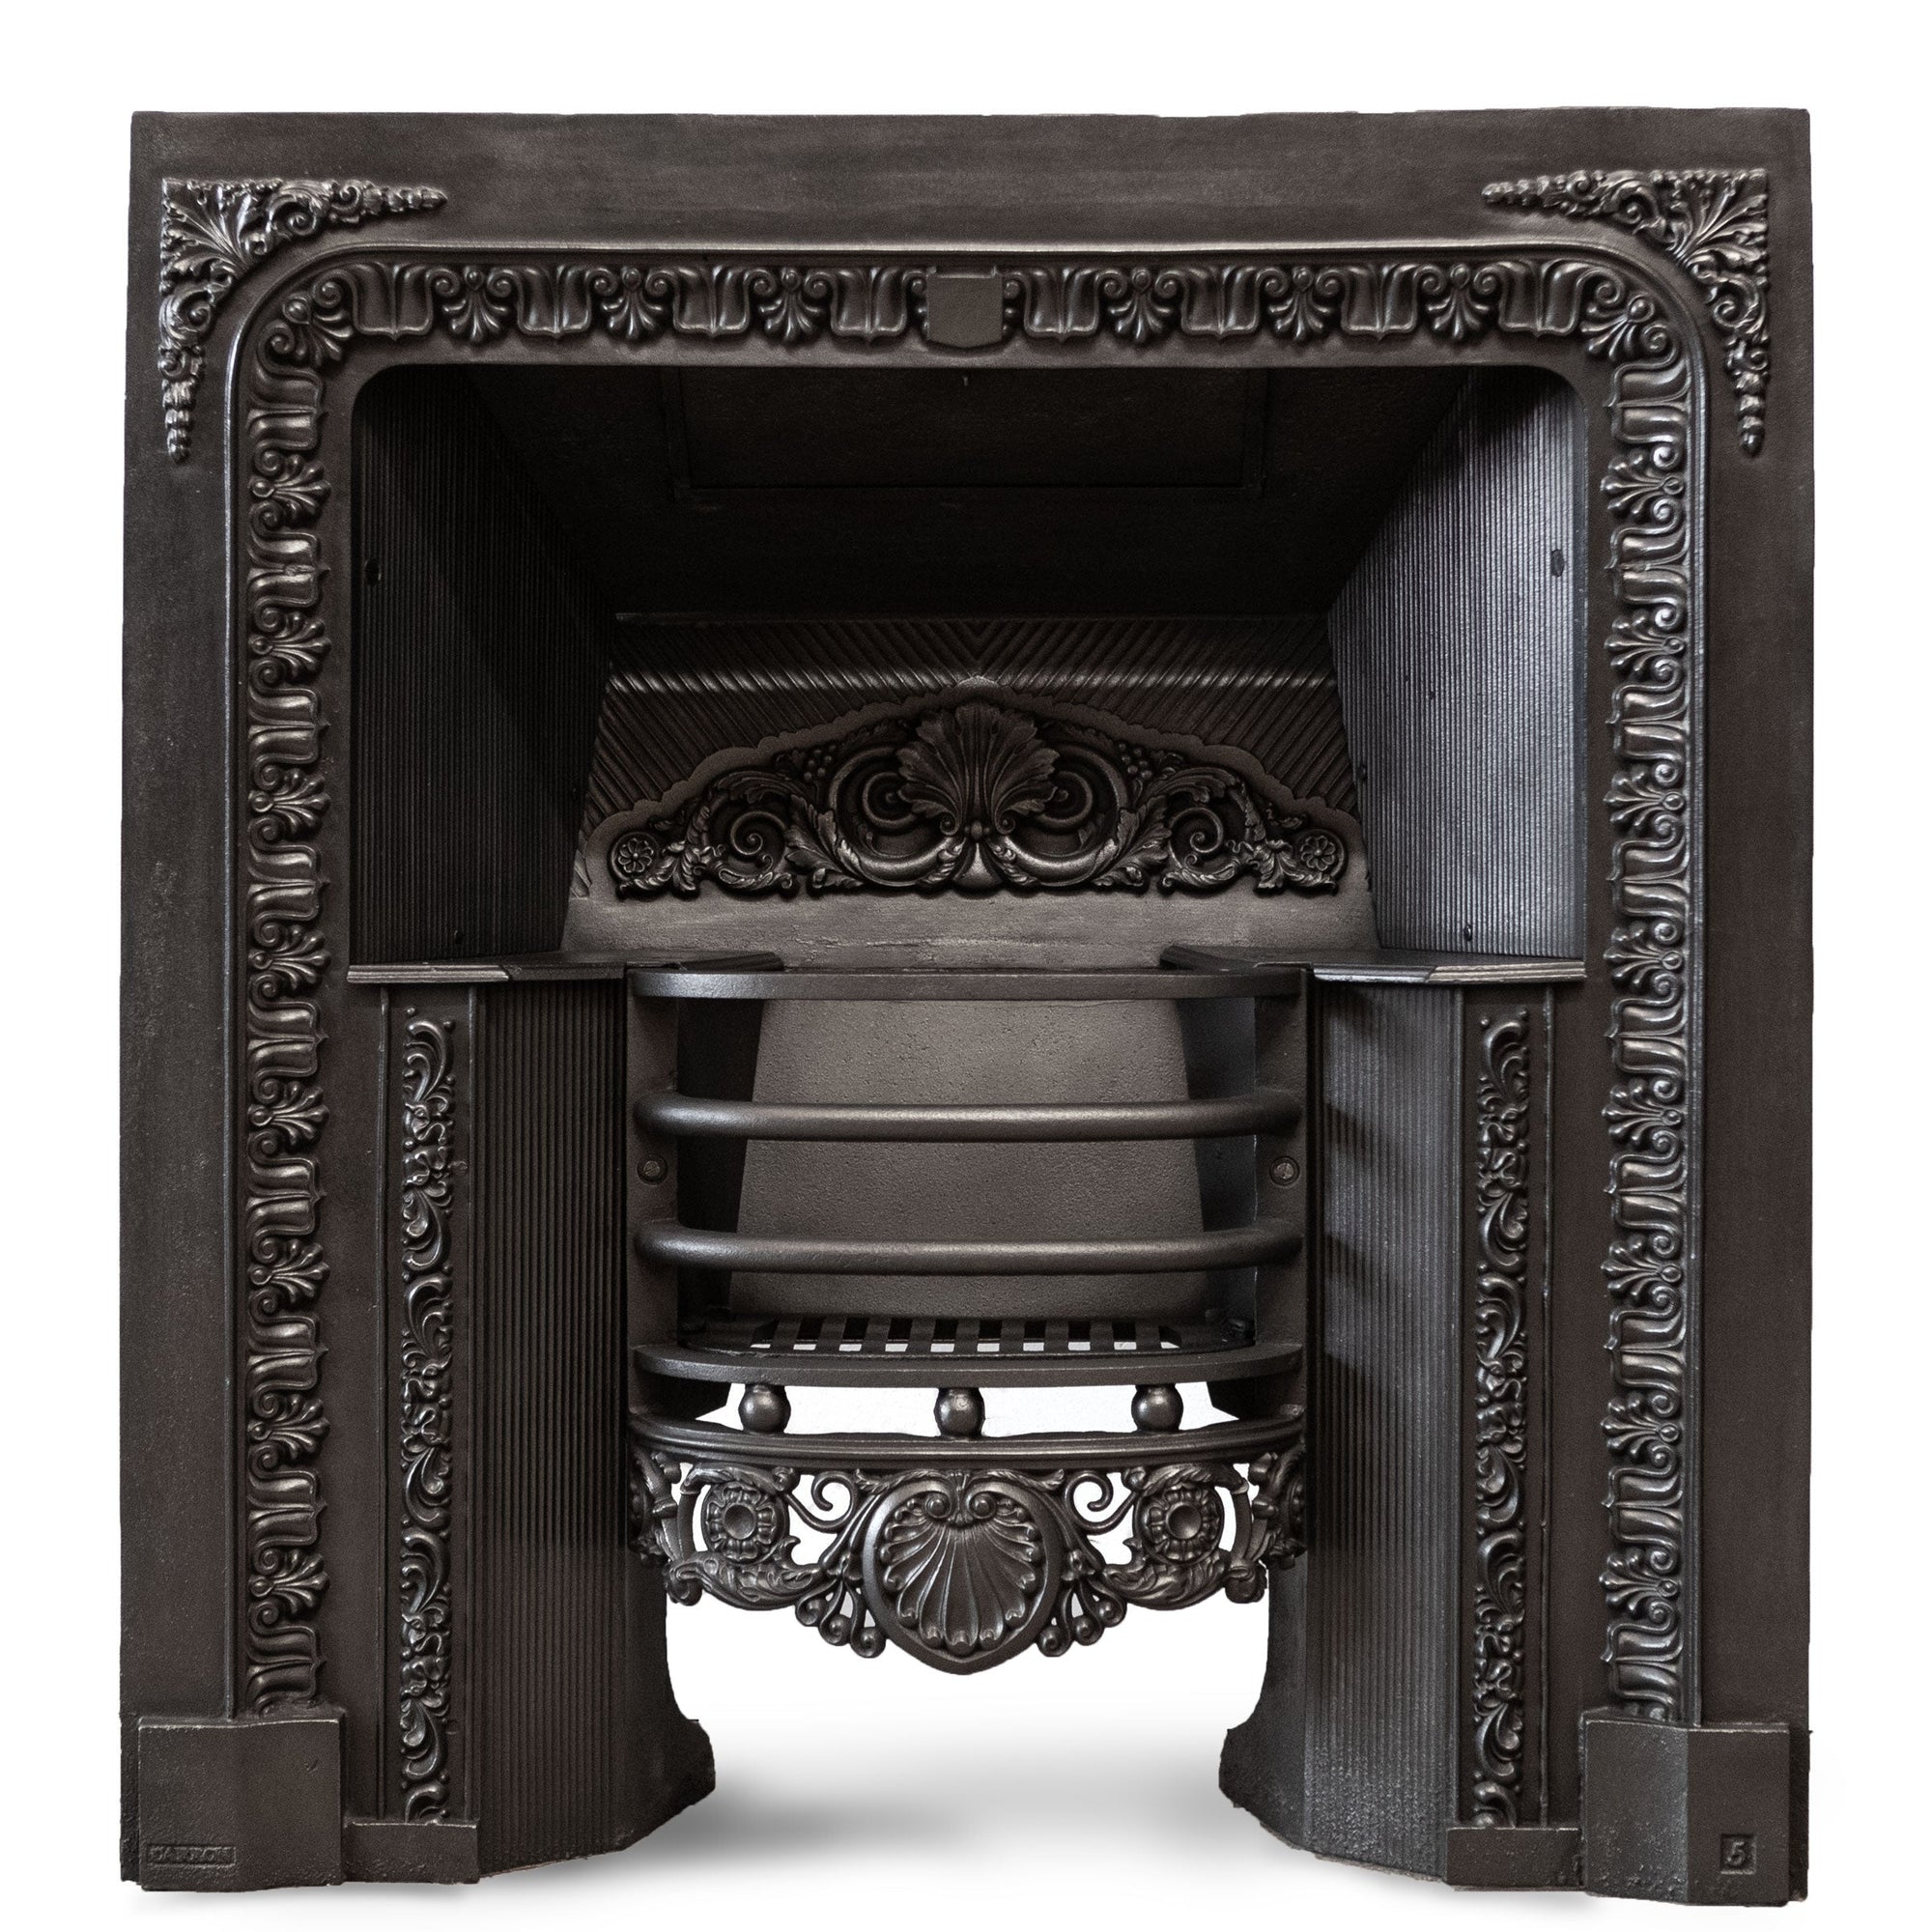 Antique Ornate Georgian Style Cast Iron Fireplace Insert | The Architectural Forum